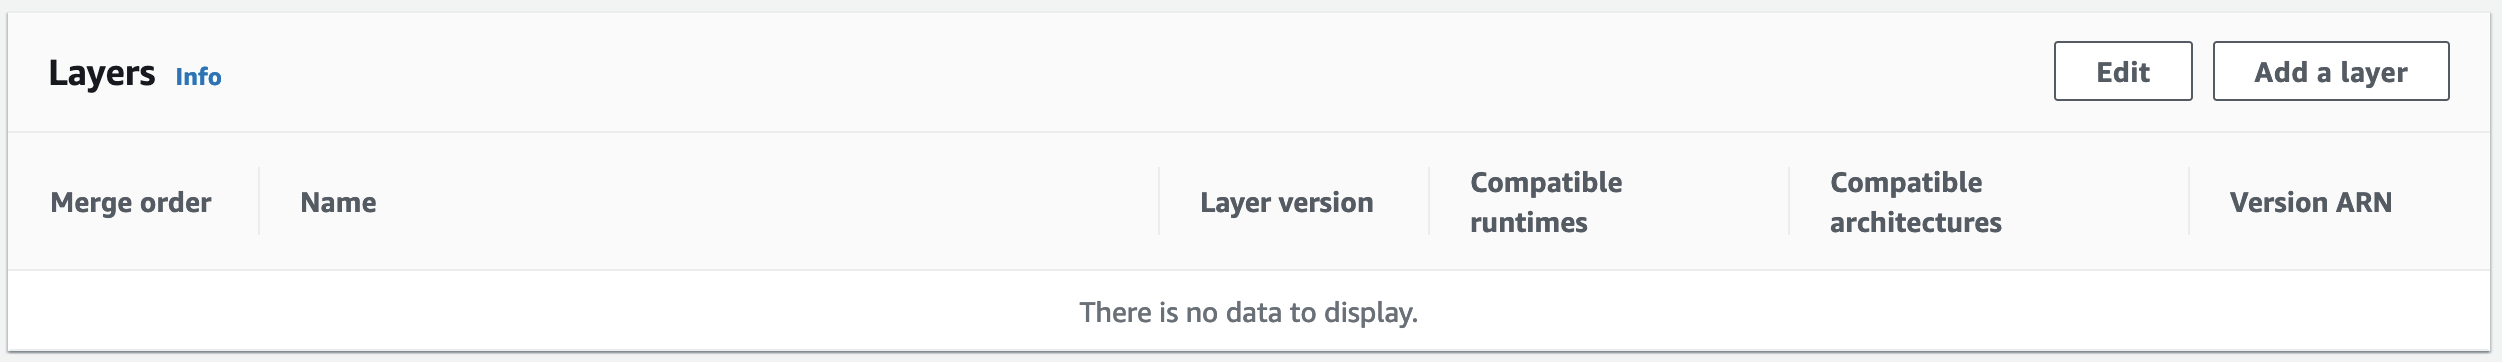 image of layer configuration section in AWS Console